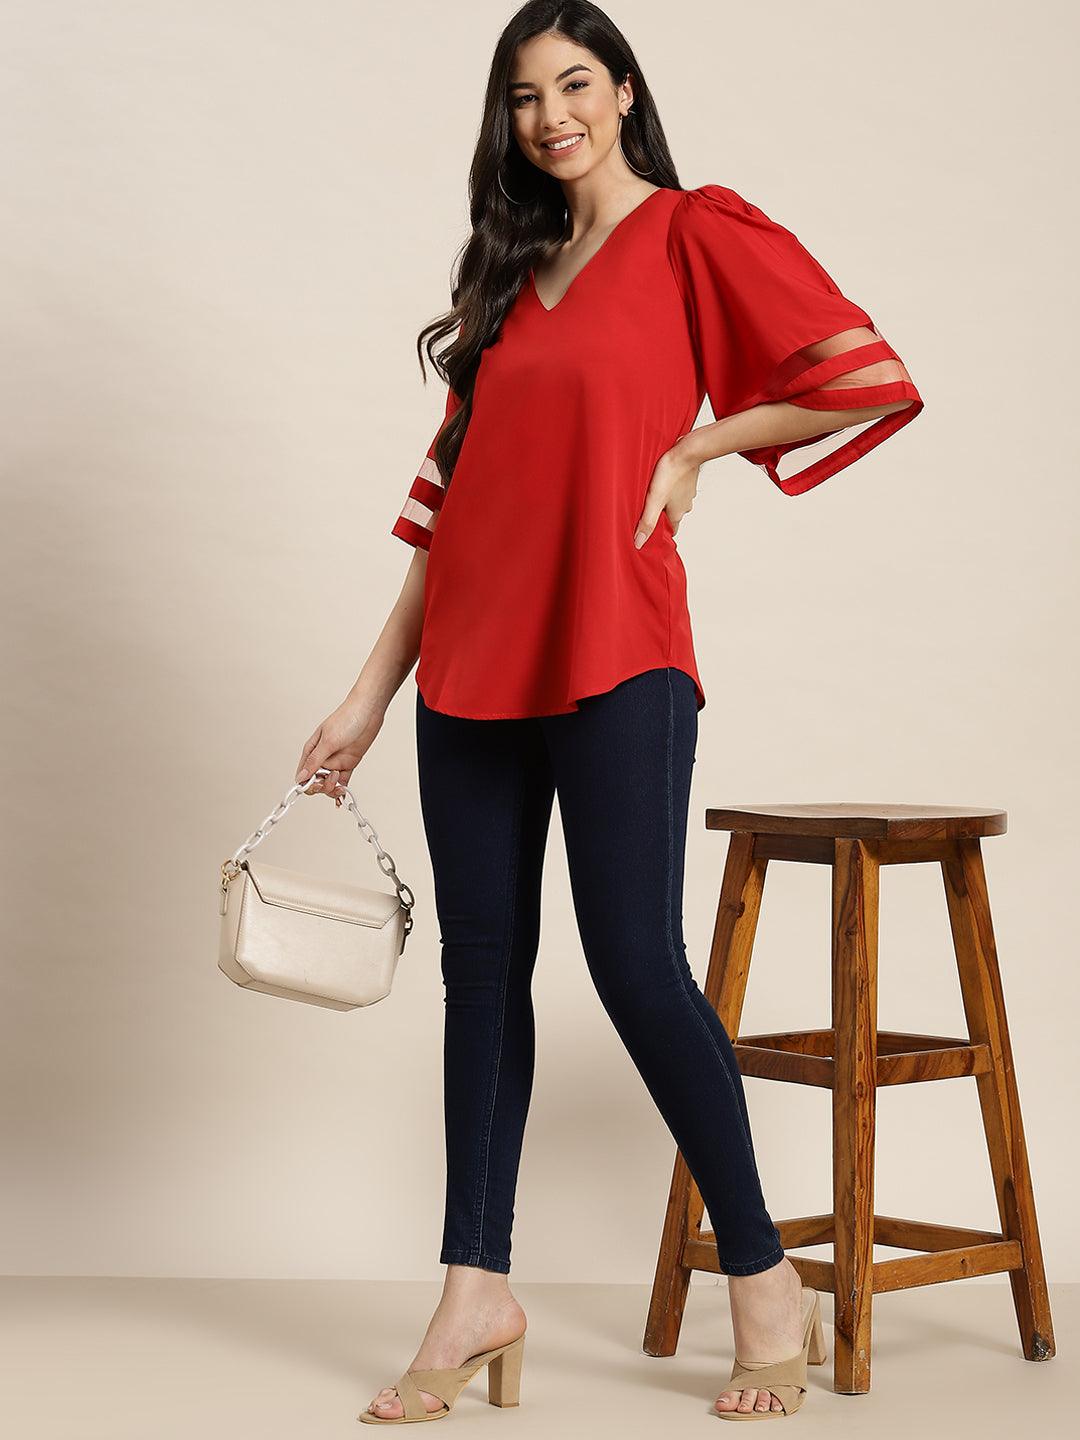 Qurvii Red Mesh Bell Sleeve Top - Qurvii India